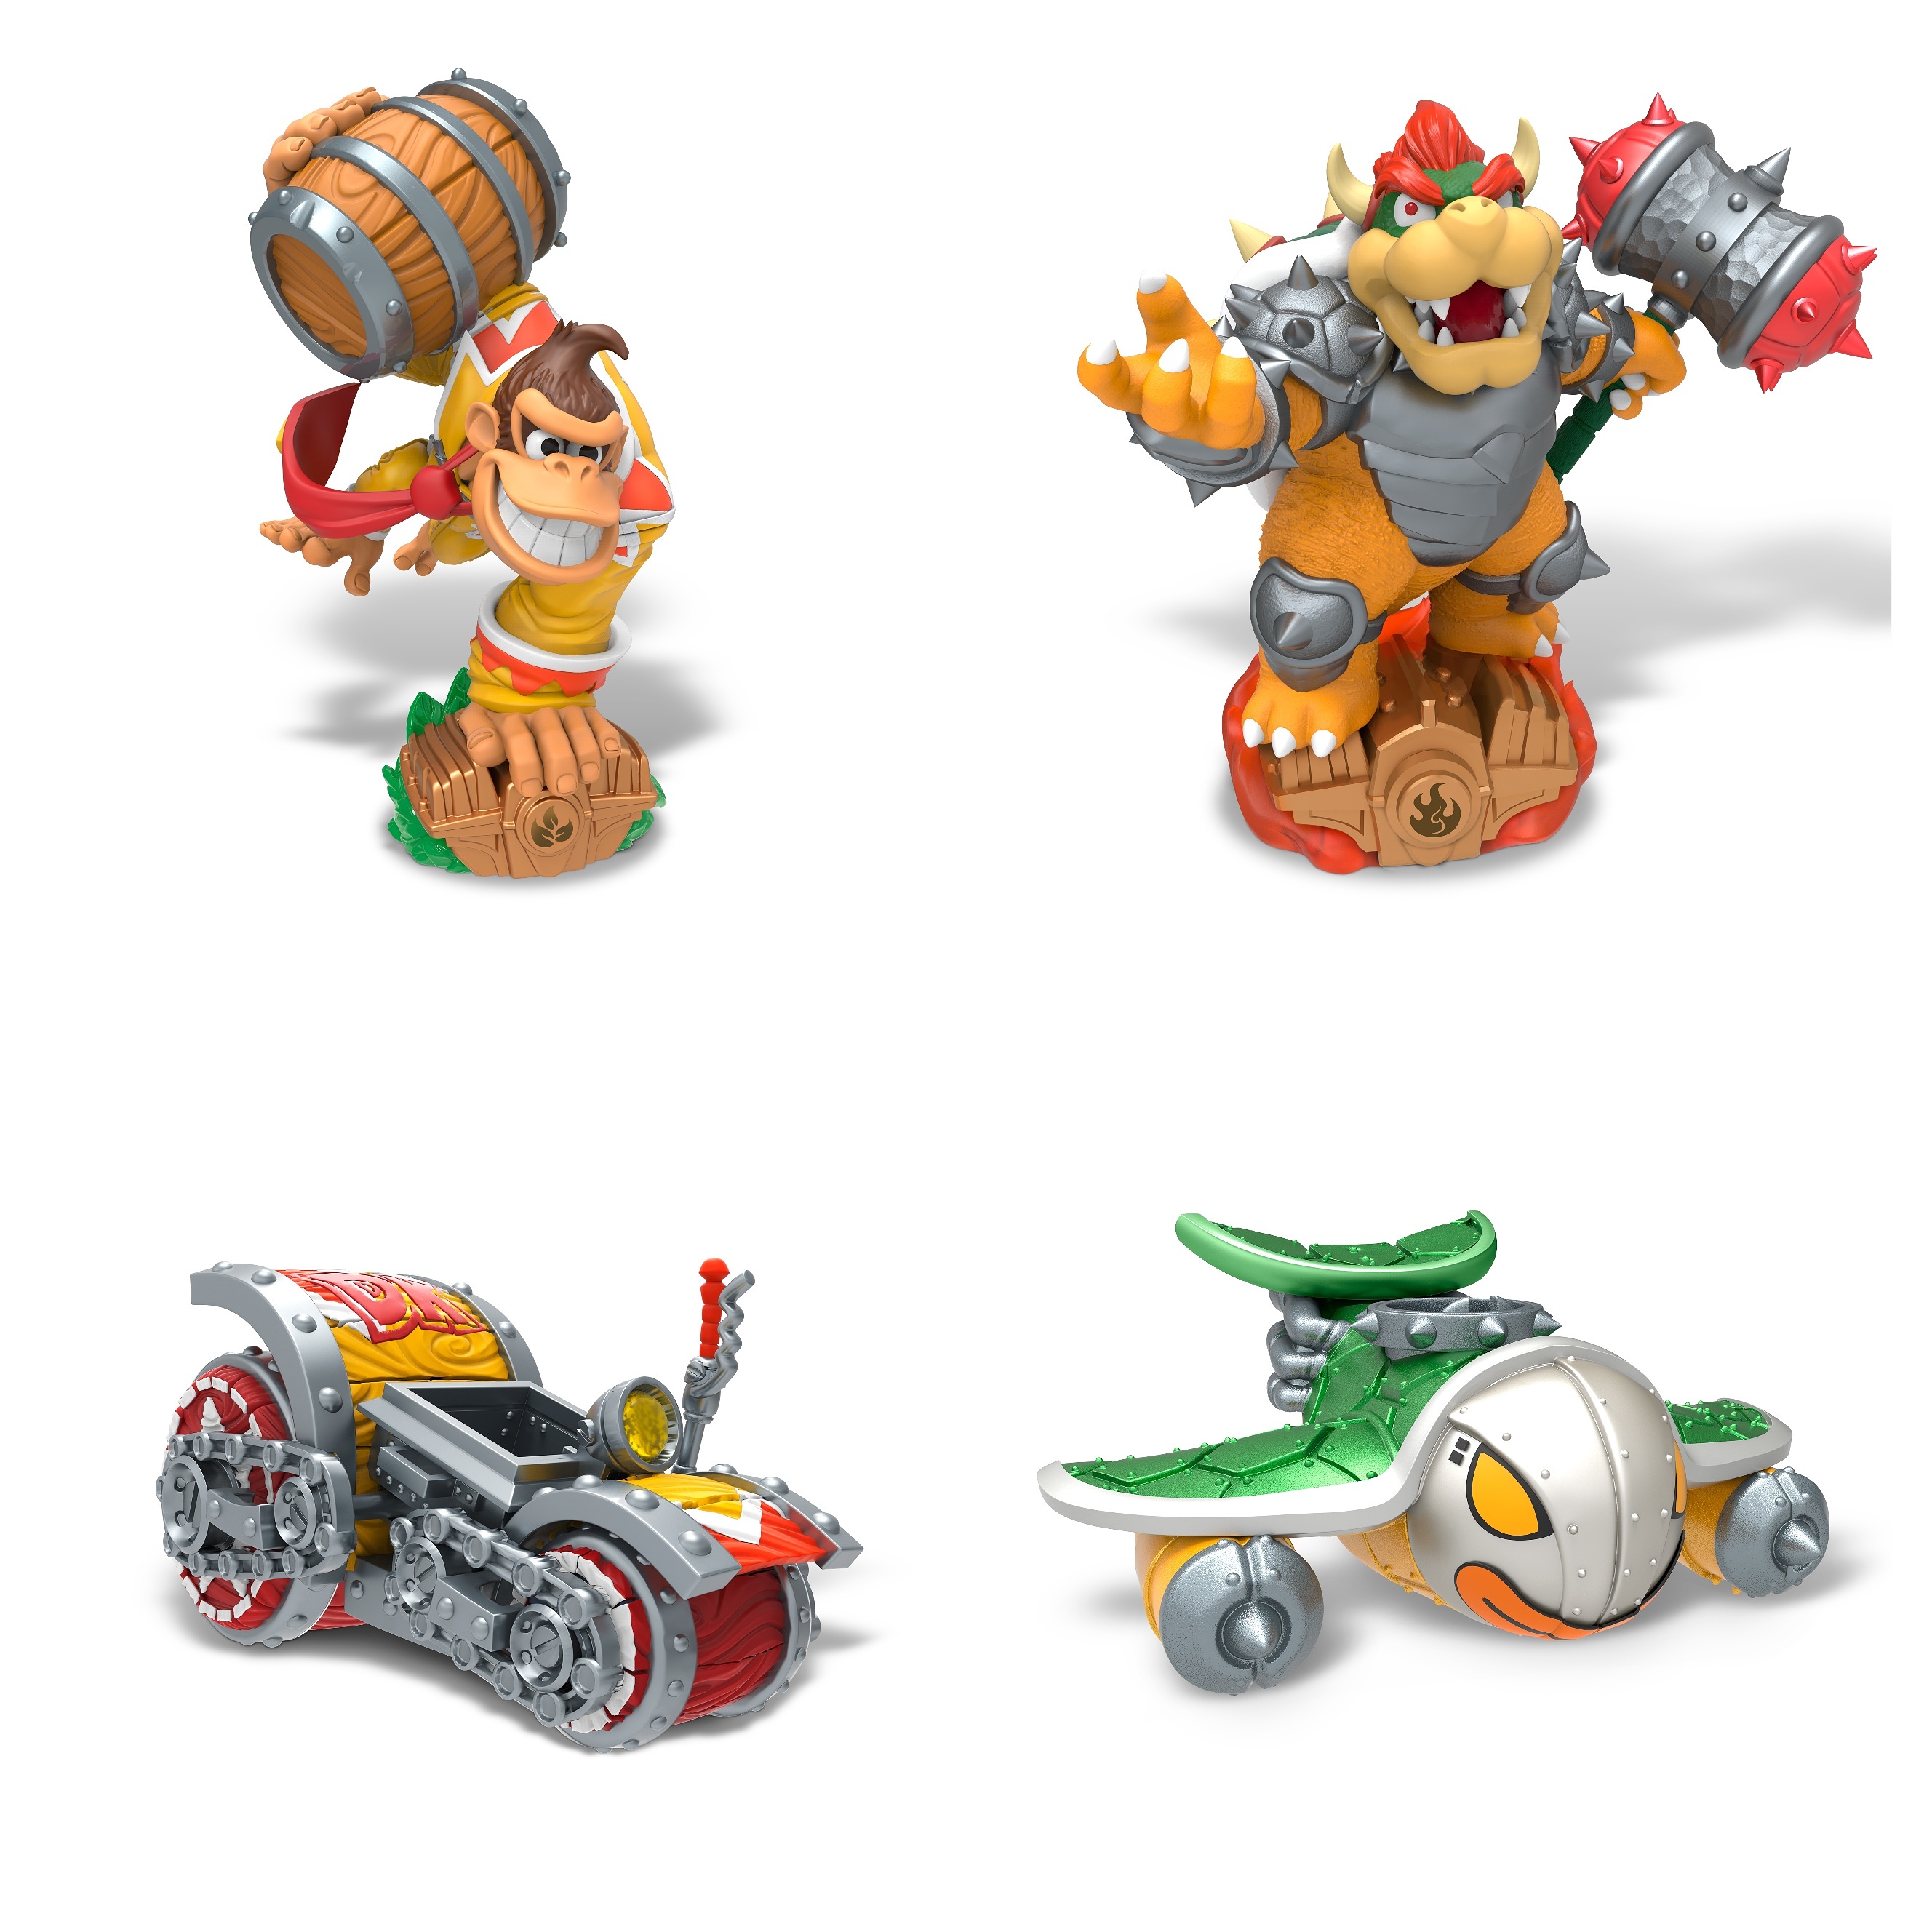 Donkey Kong and Bowser to Guest Star in Skylanders SuperChargers